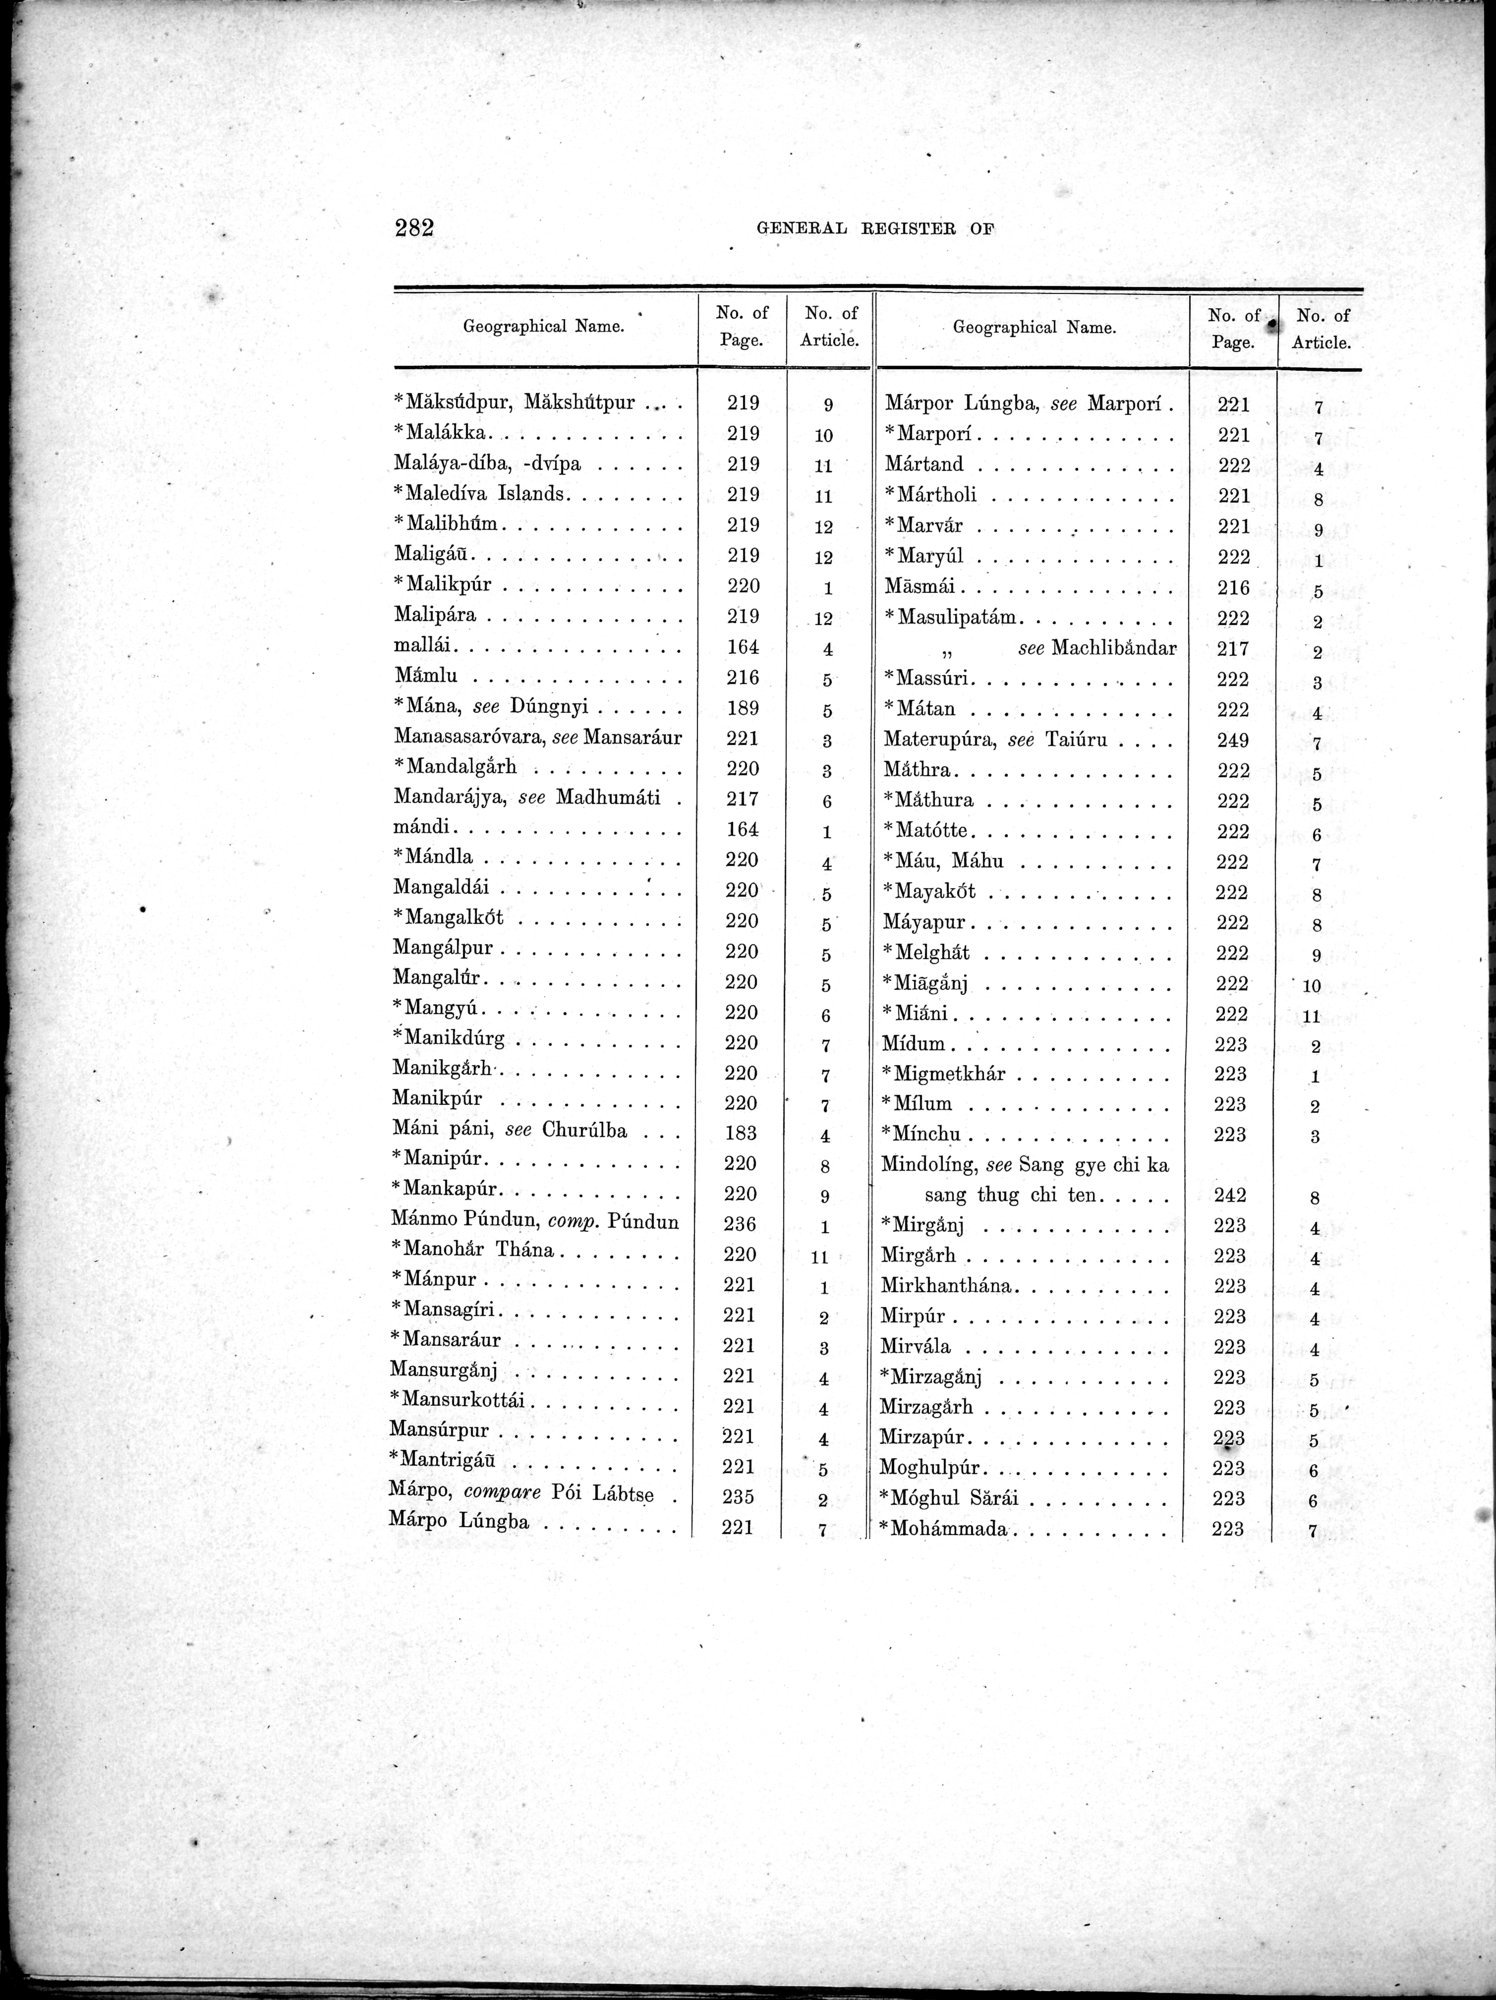 Results of a Scientific Mission to India and High Asia : vol.3 / Page 314 (Grayscale High Resolution Image)